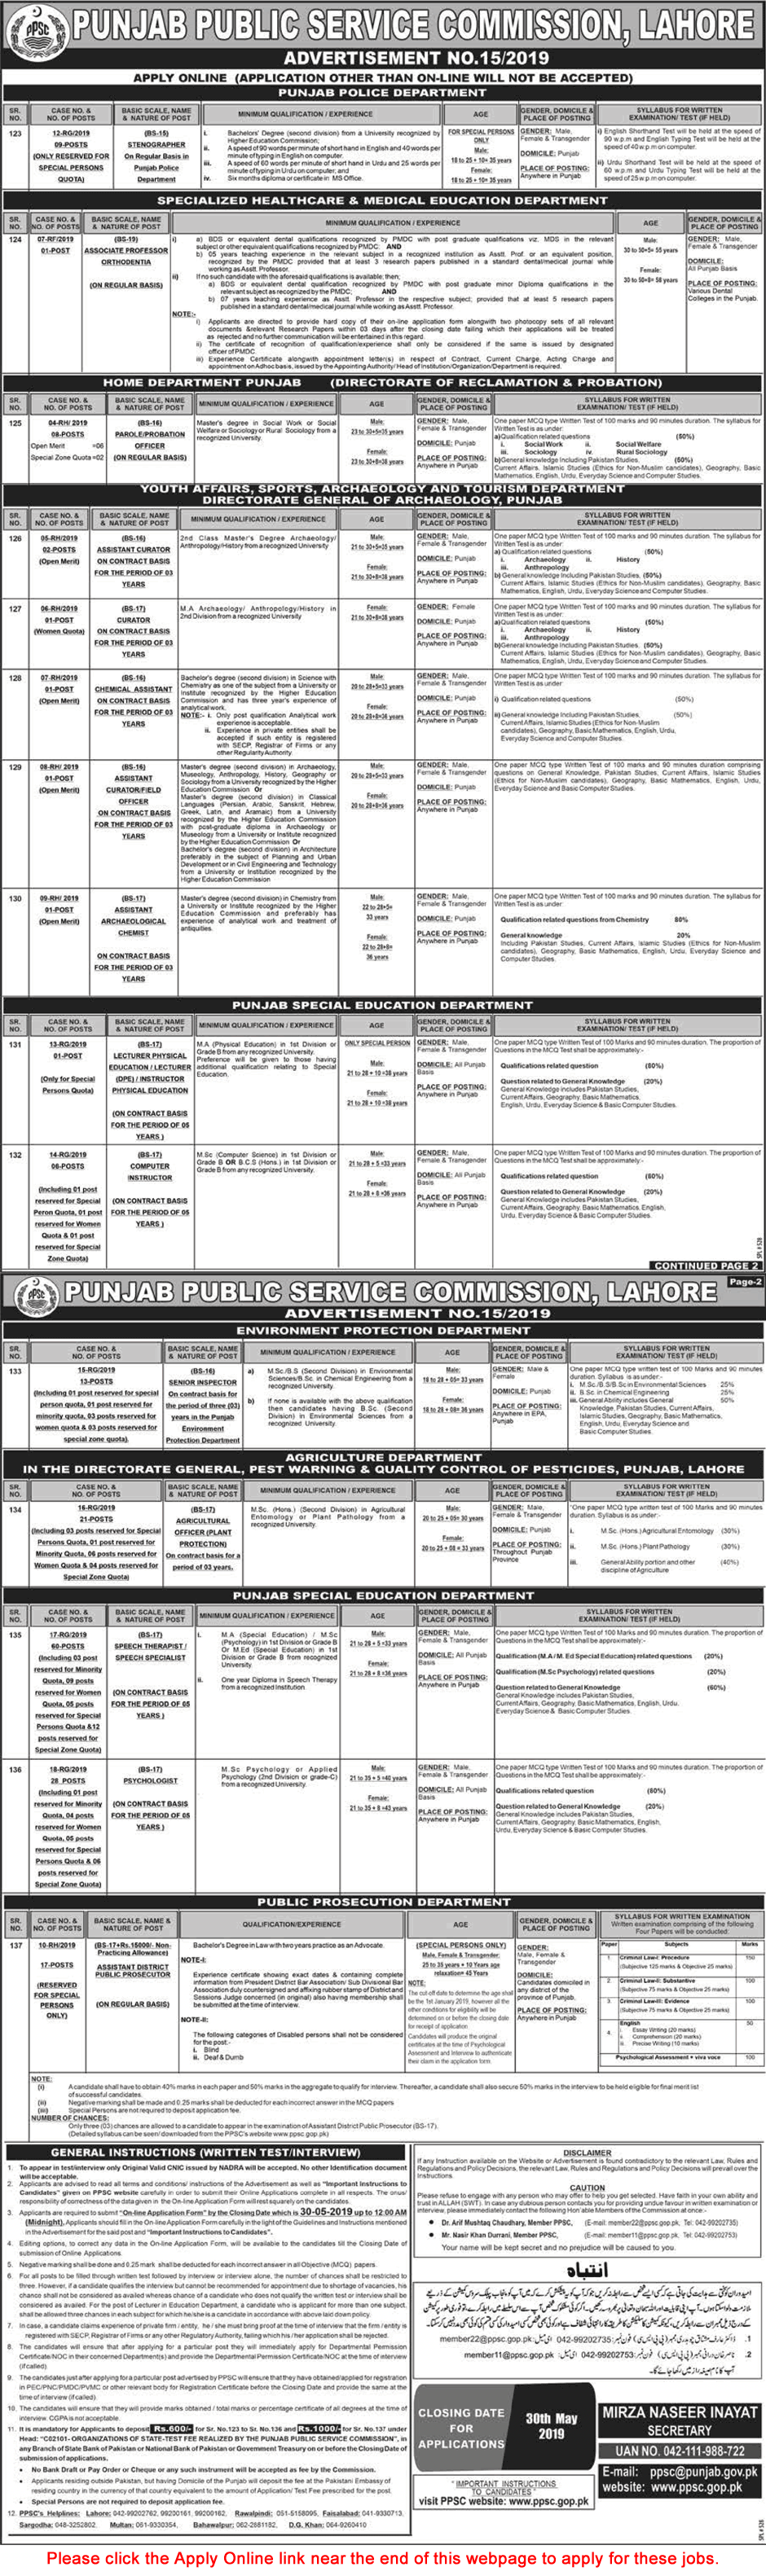 PPSC Jobs May 2019 Apply Online Consolidated Advertisement No 15/2019 Latest